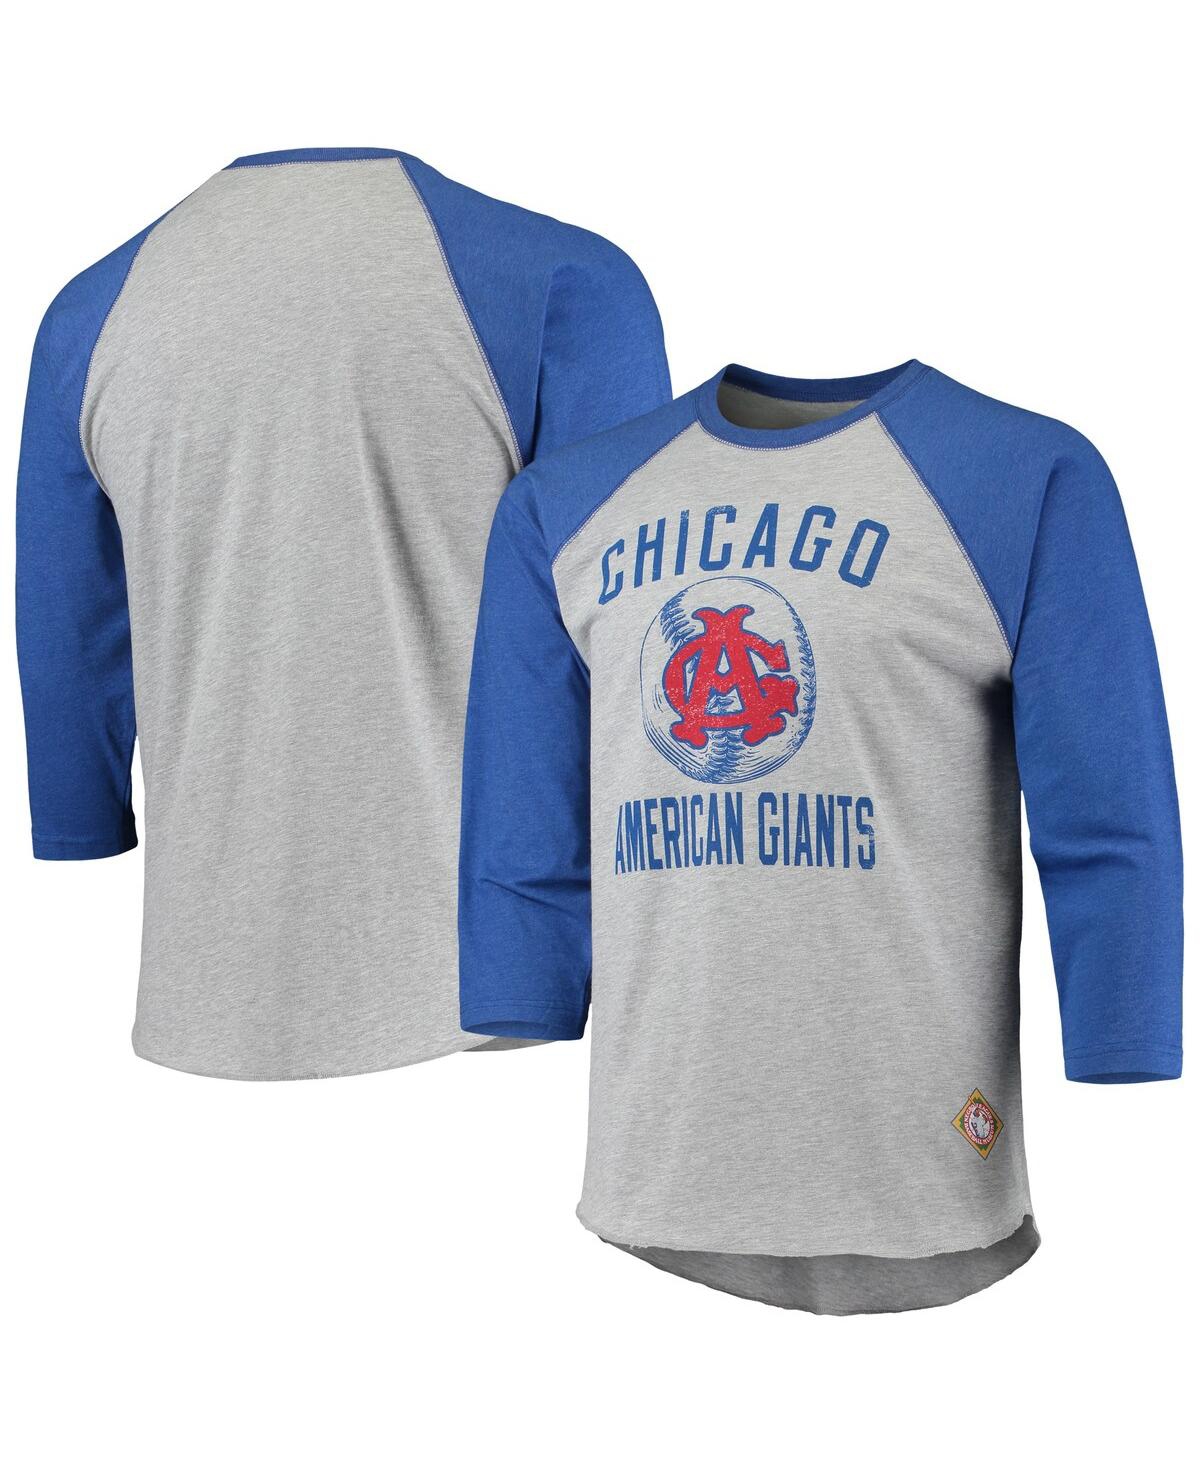 Shop Stitches Men's  Heather Gray, Royal Chicago American Giants Negro League Wordmark Raglan 3/4 Sleeve T In Heathered Gray,royal